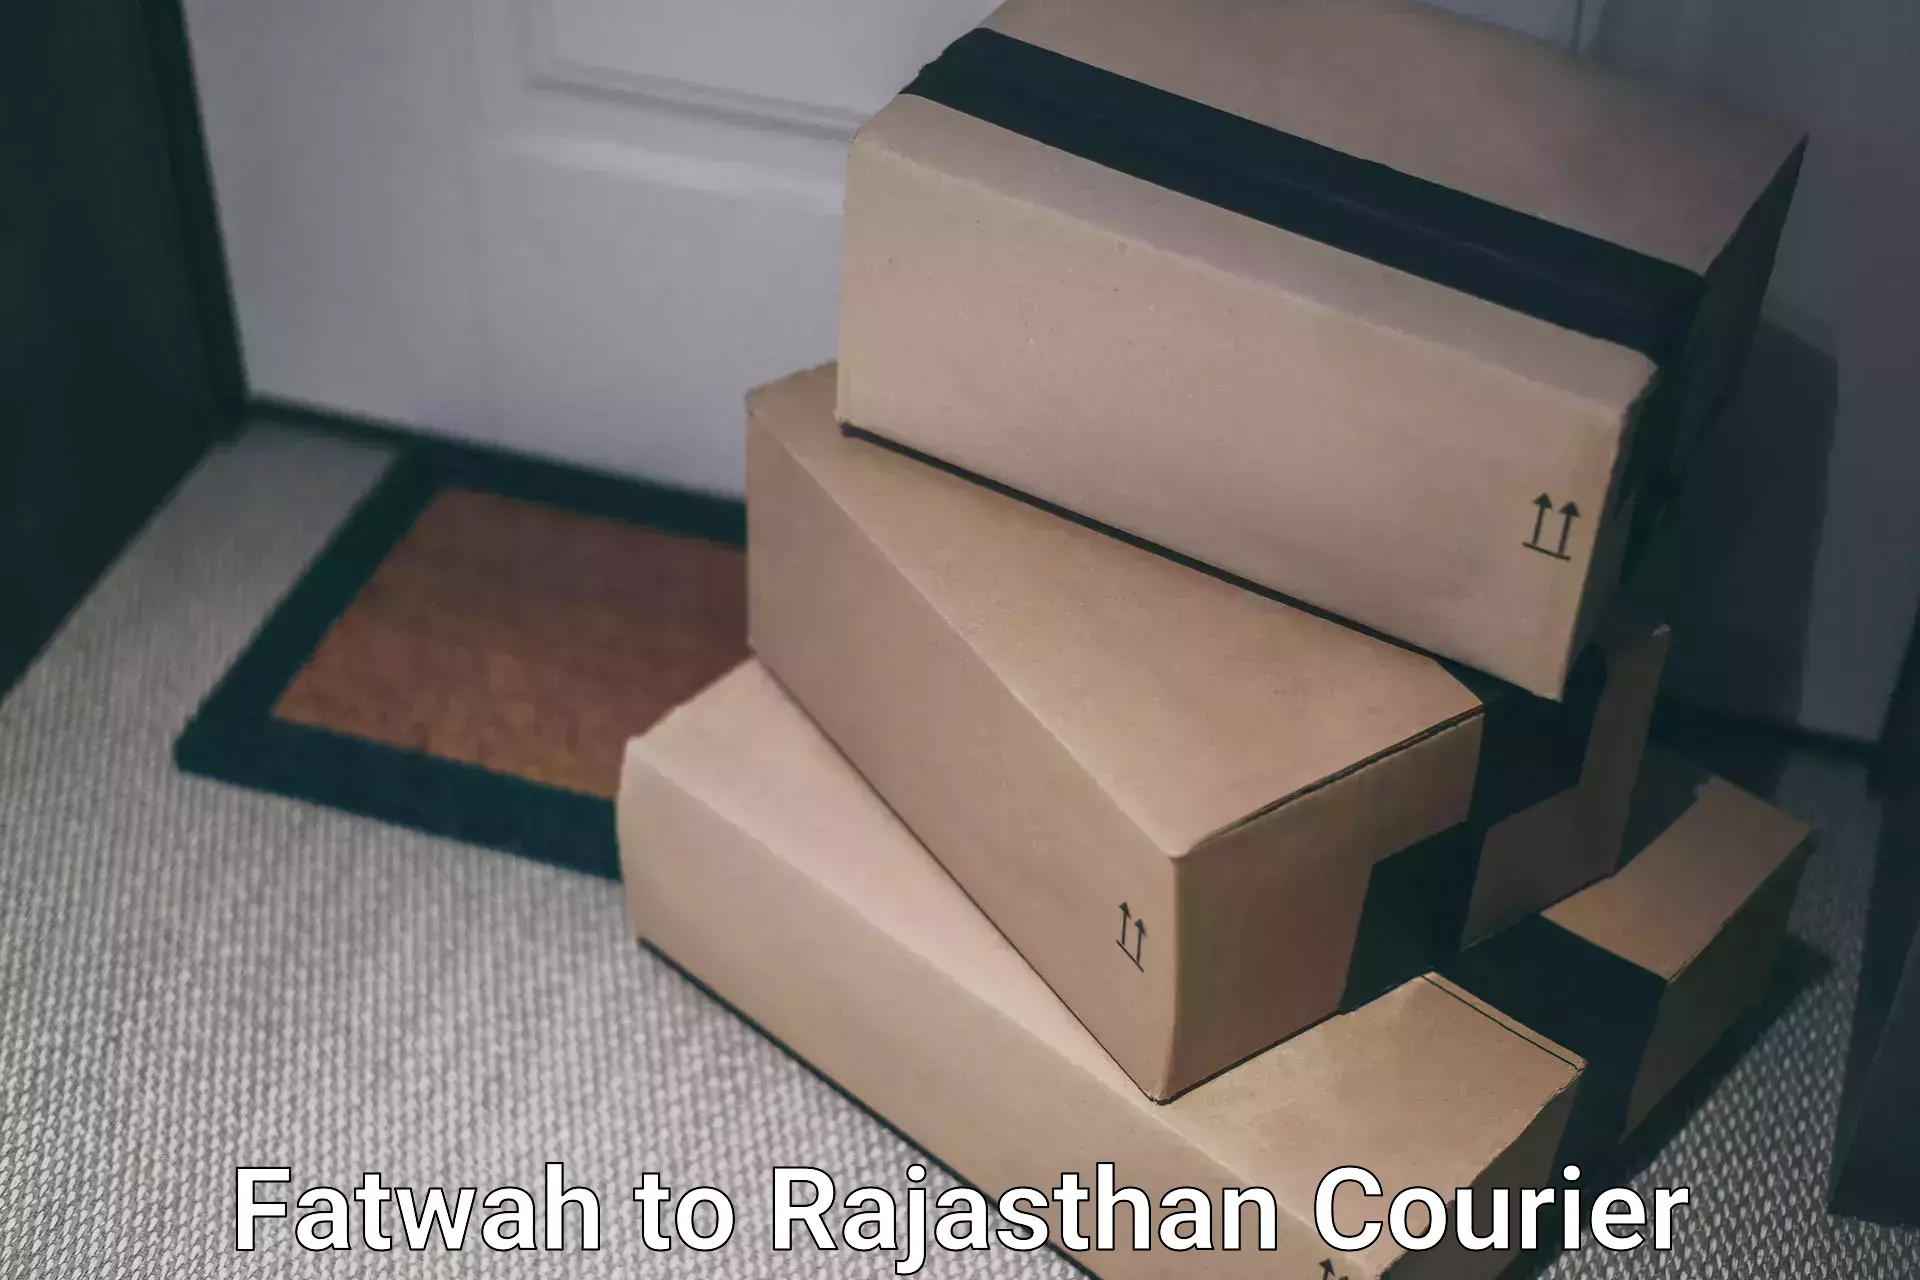 Bulk courier orders in Fatwah to Rajasthan